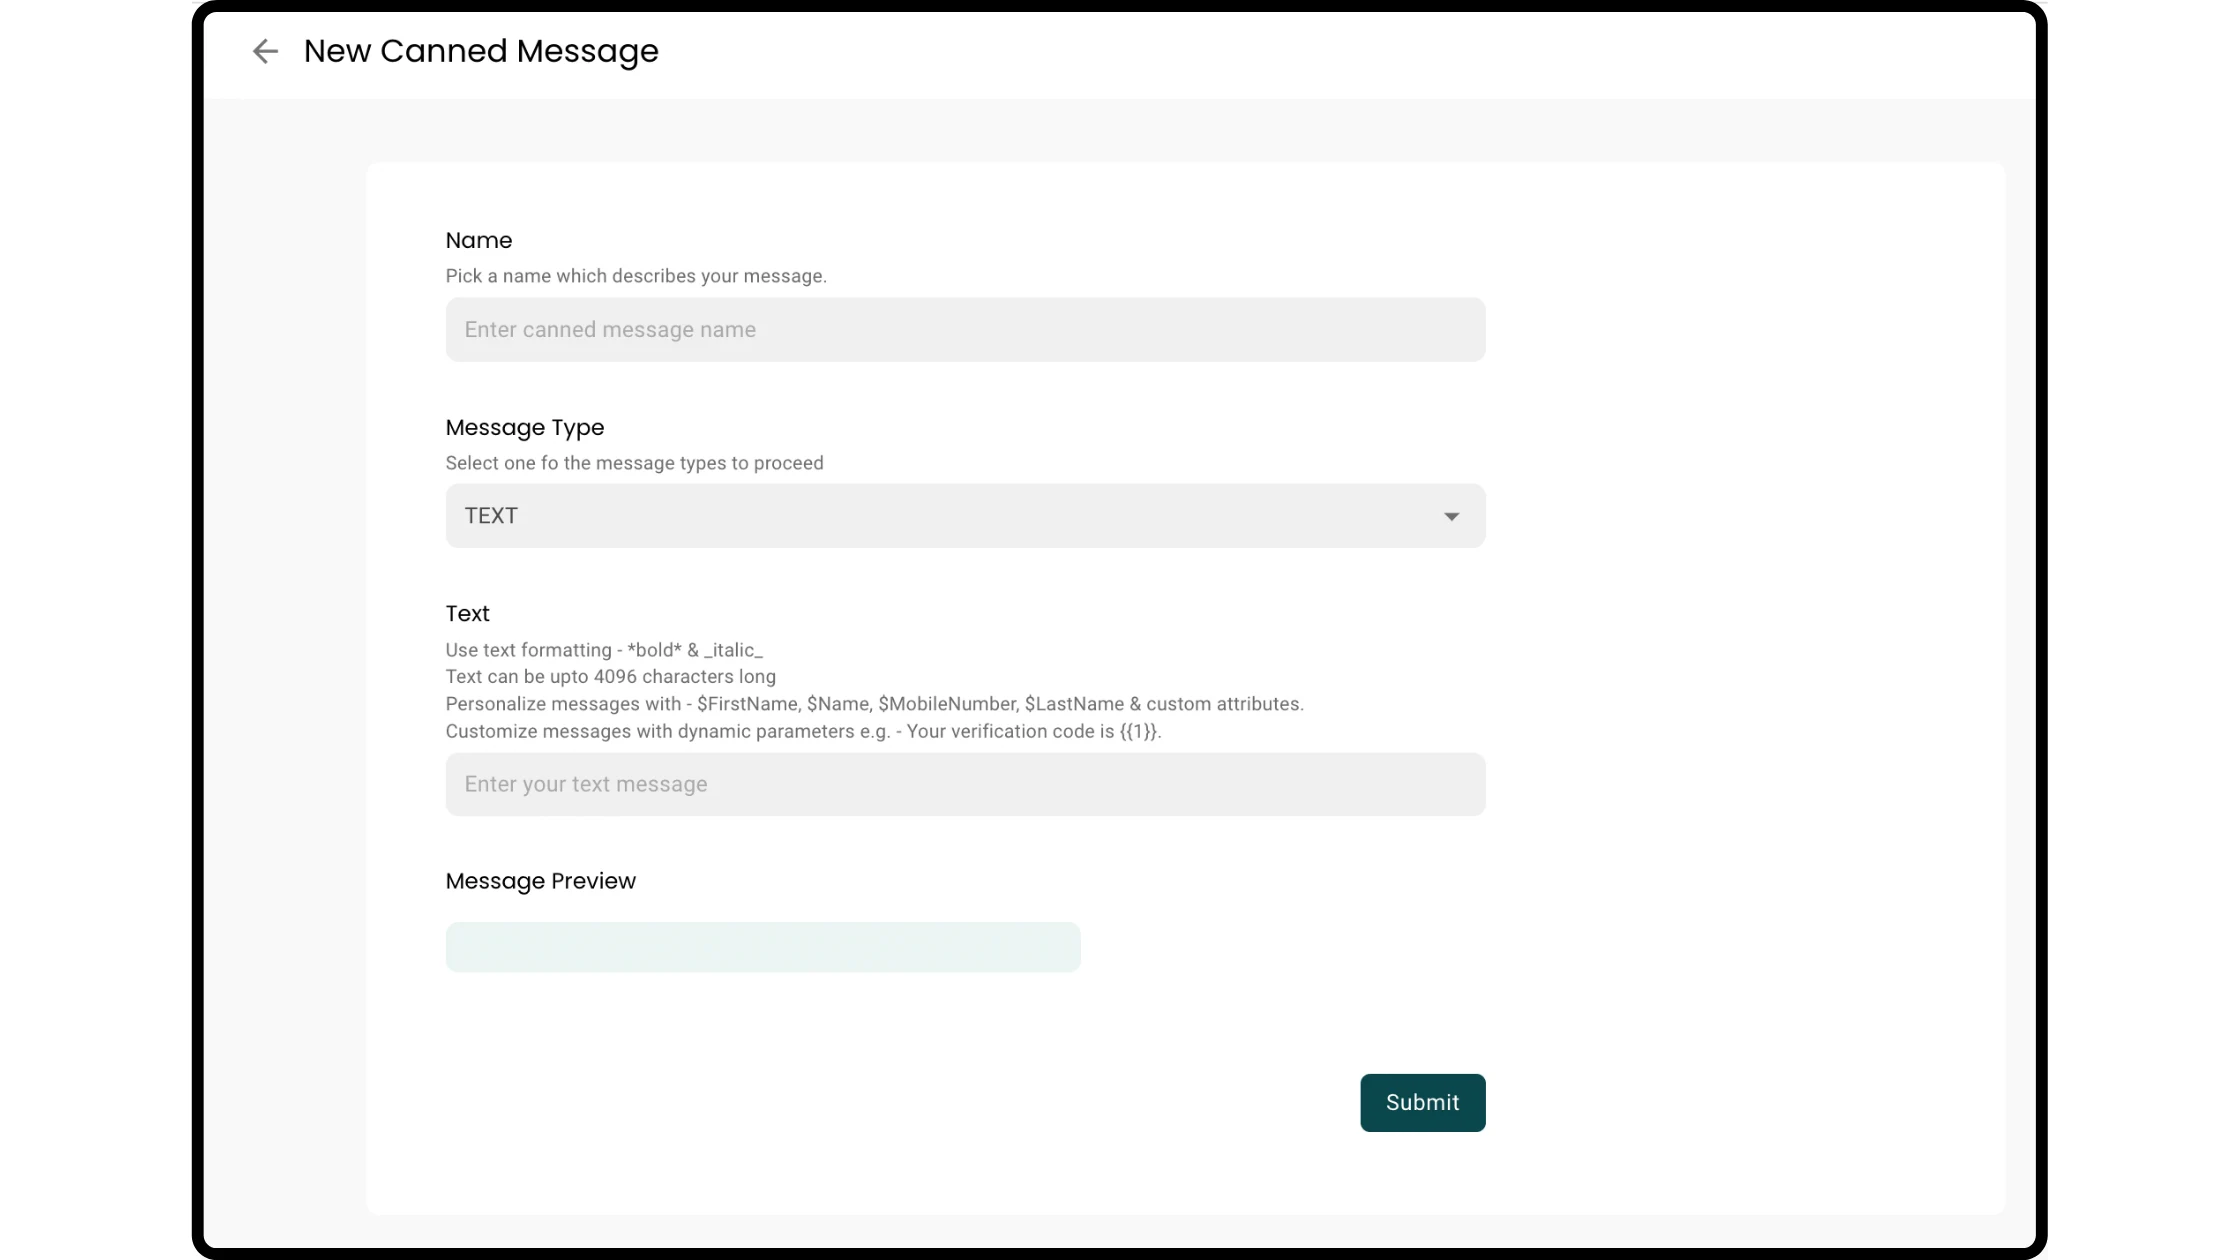 Create a canned message